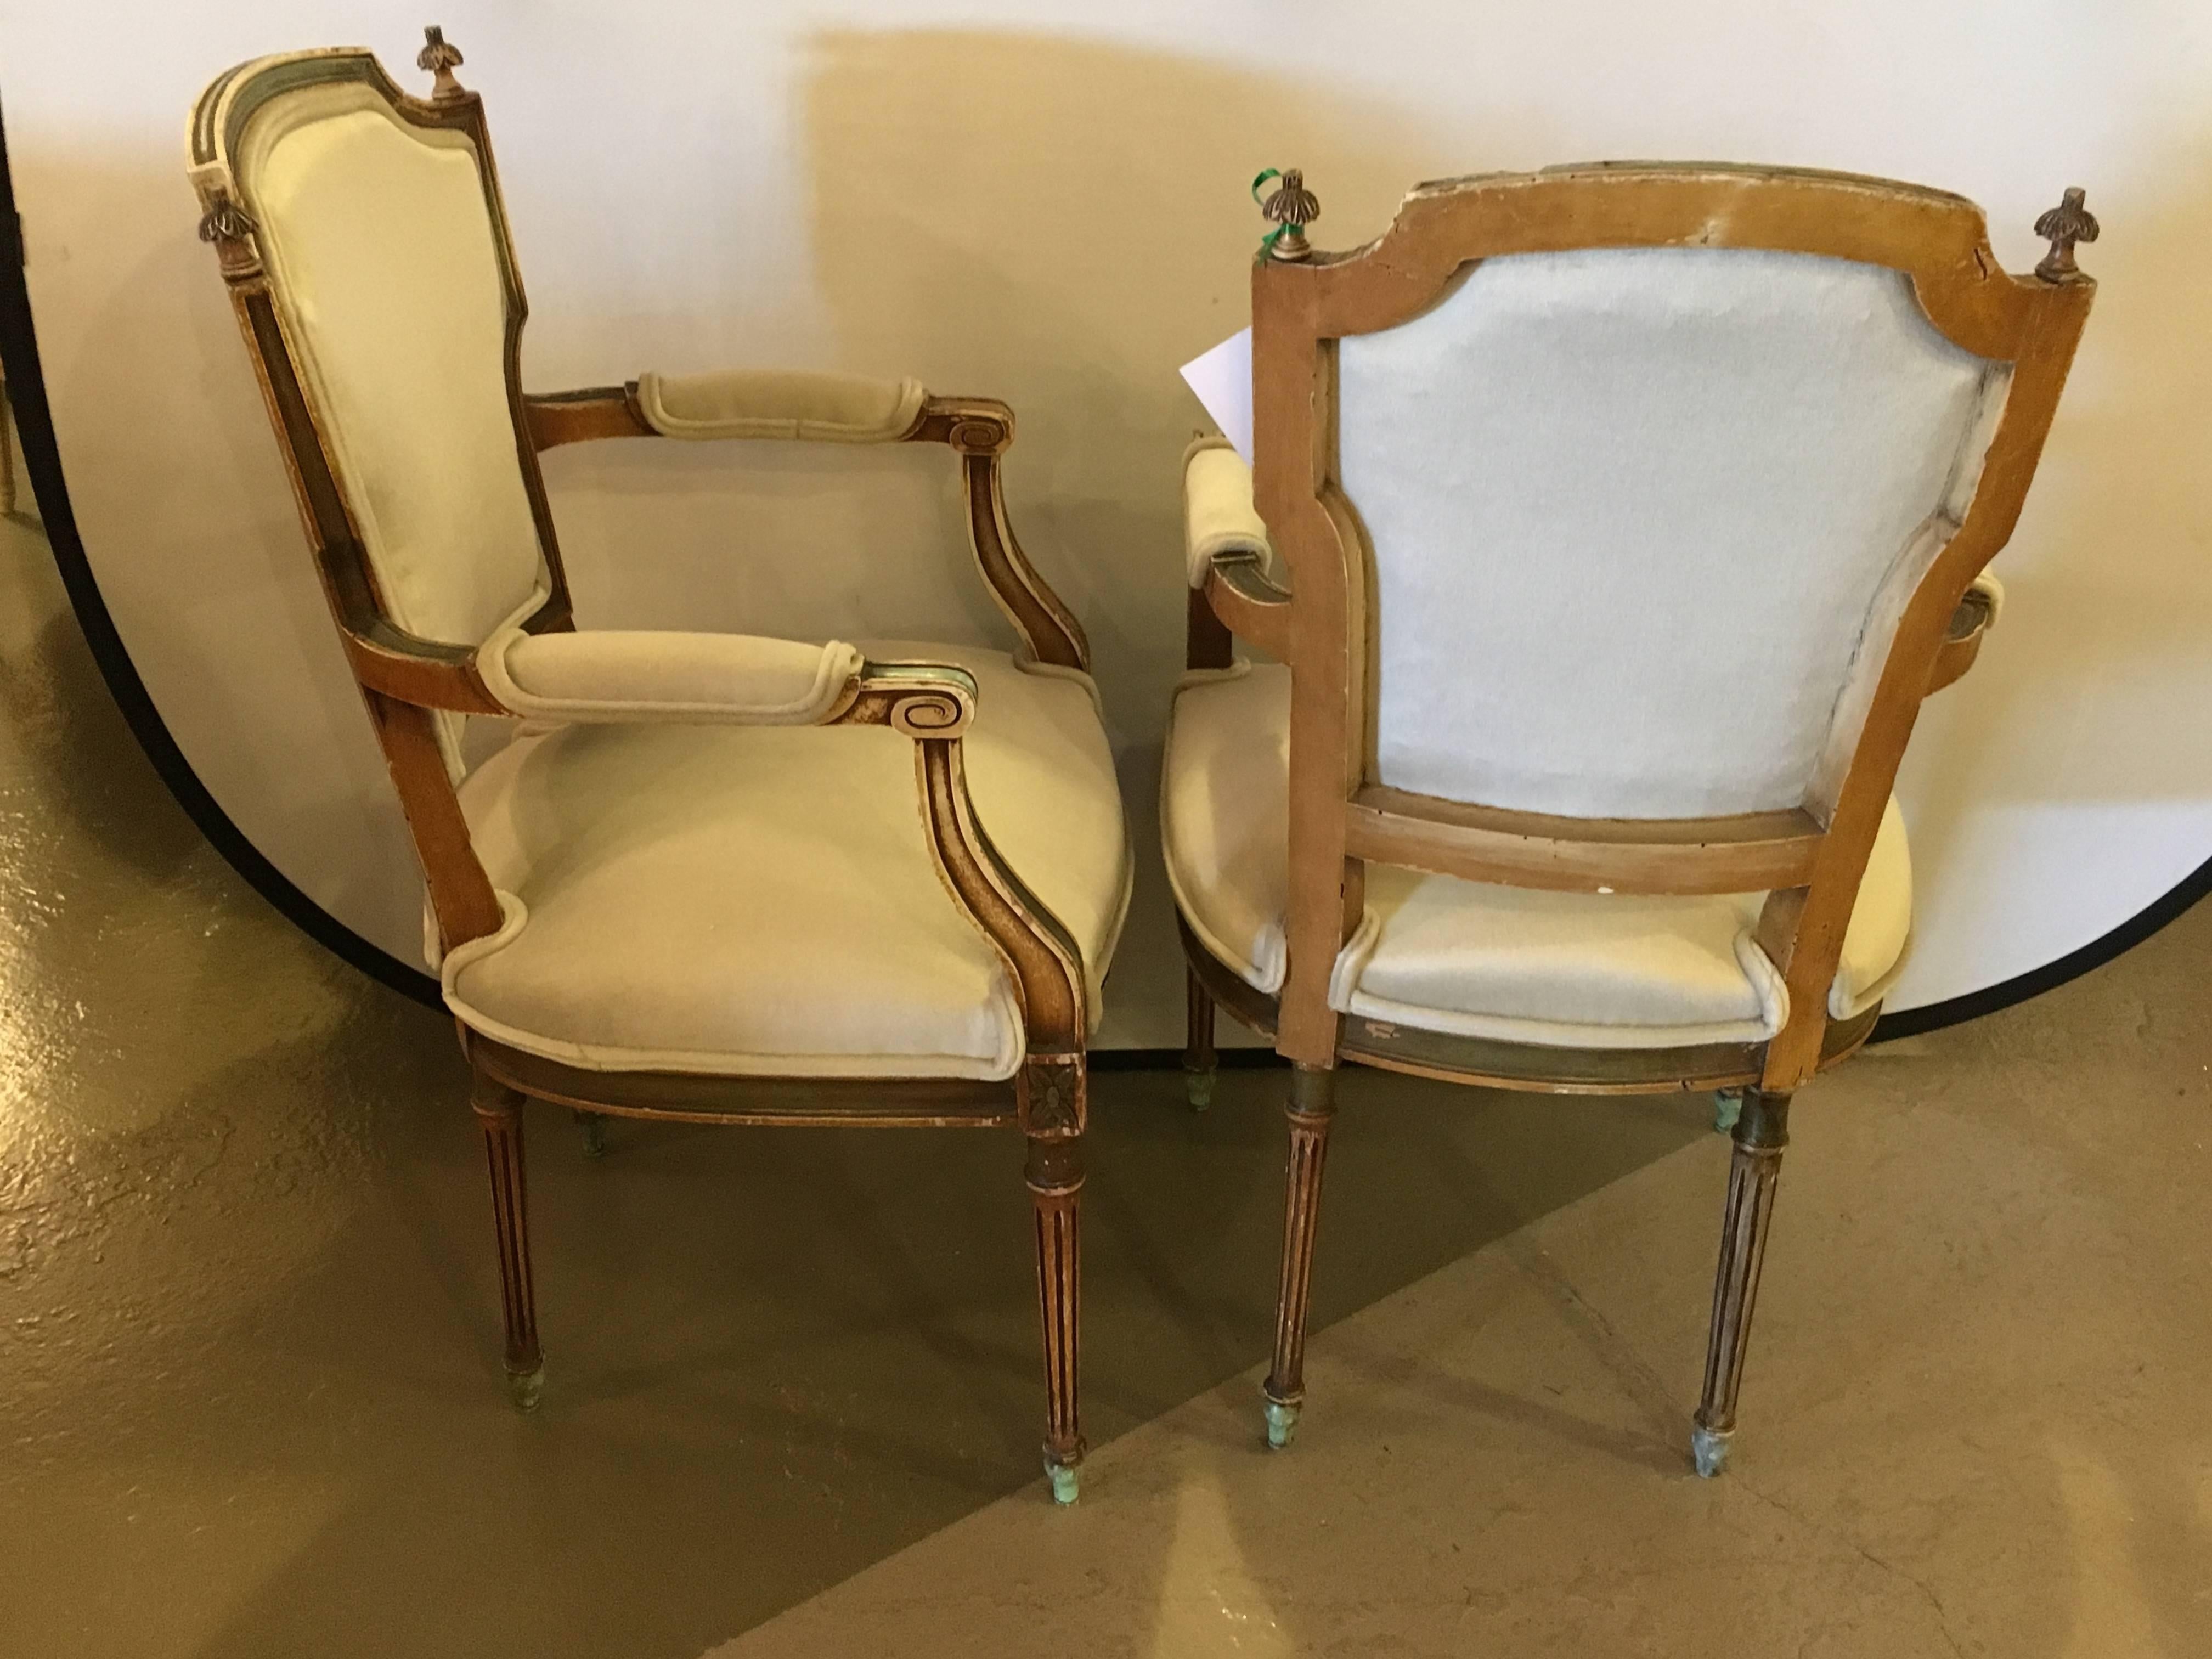 Maison Jansen stamped pair of distressed Louis XVI style armchairs. This fine pair of Jansen Fauteuils depict the Hollywood glamour ear wonderfully. Having a worn and distressed finish in new upholstery this set would look great in any setting home